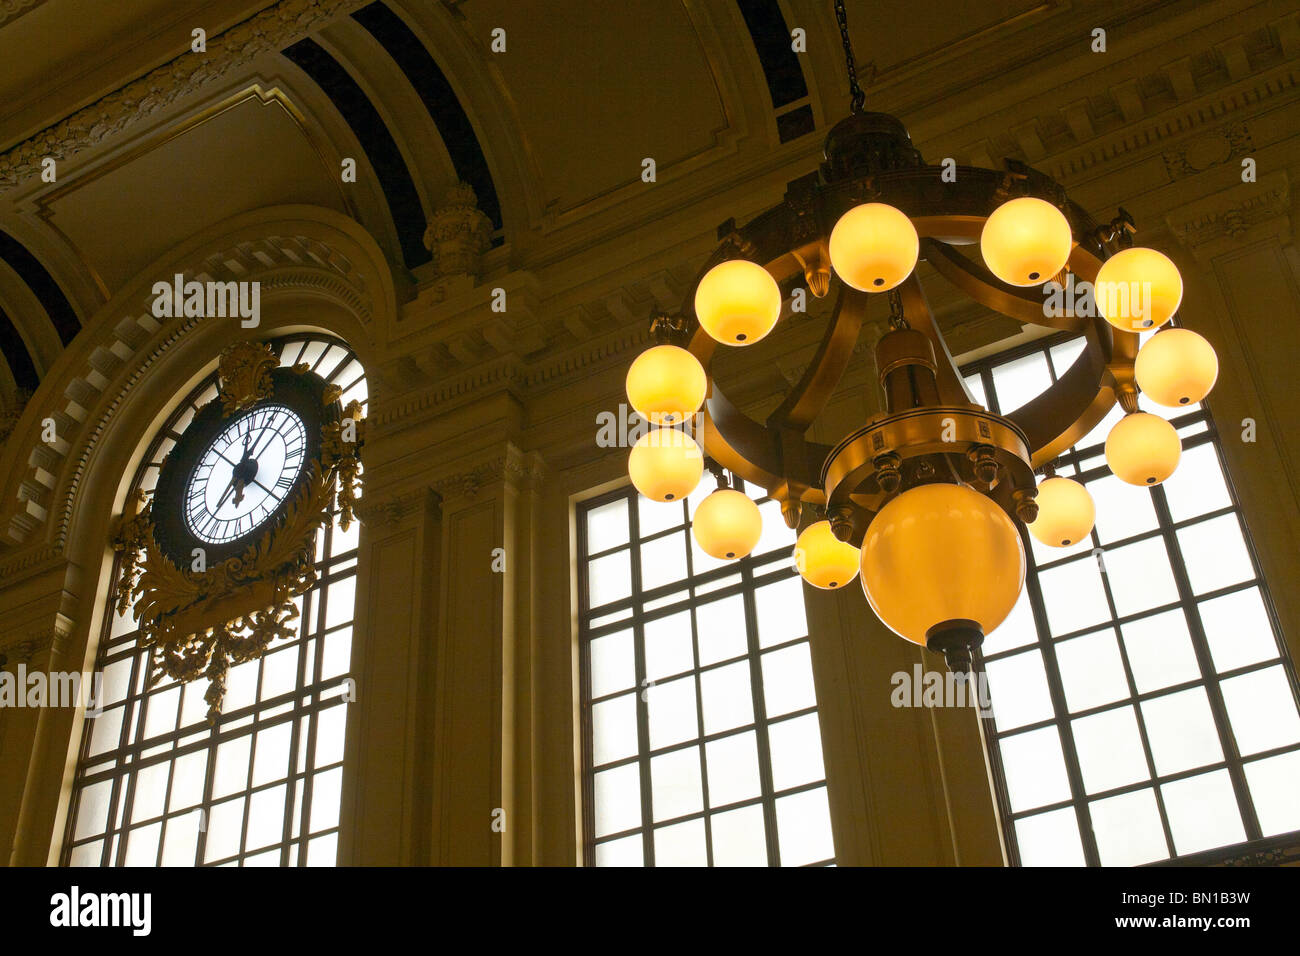 A train station clock and light fixture. Stock Photo